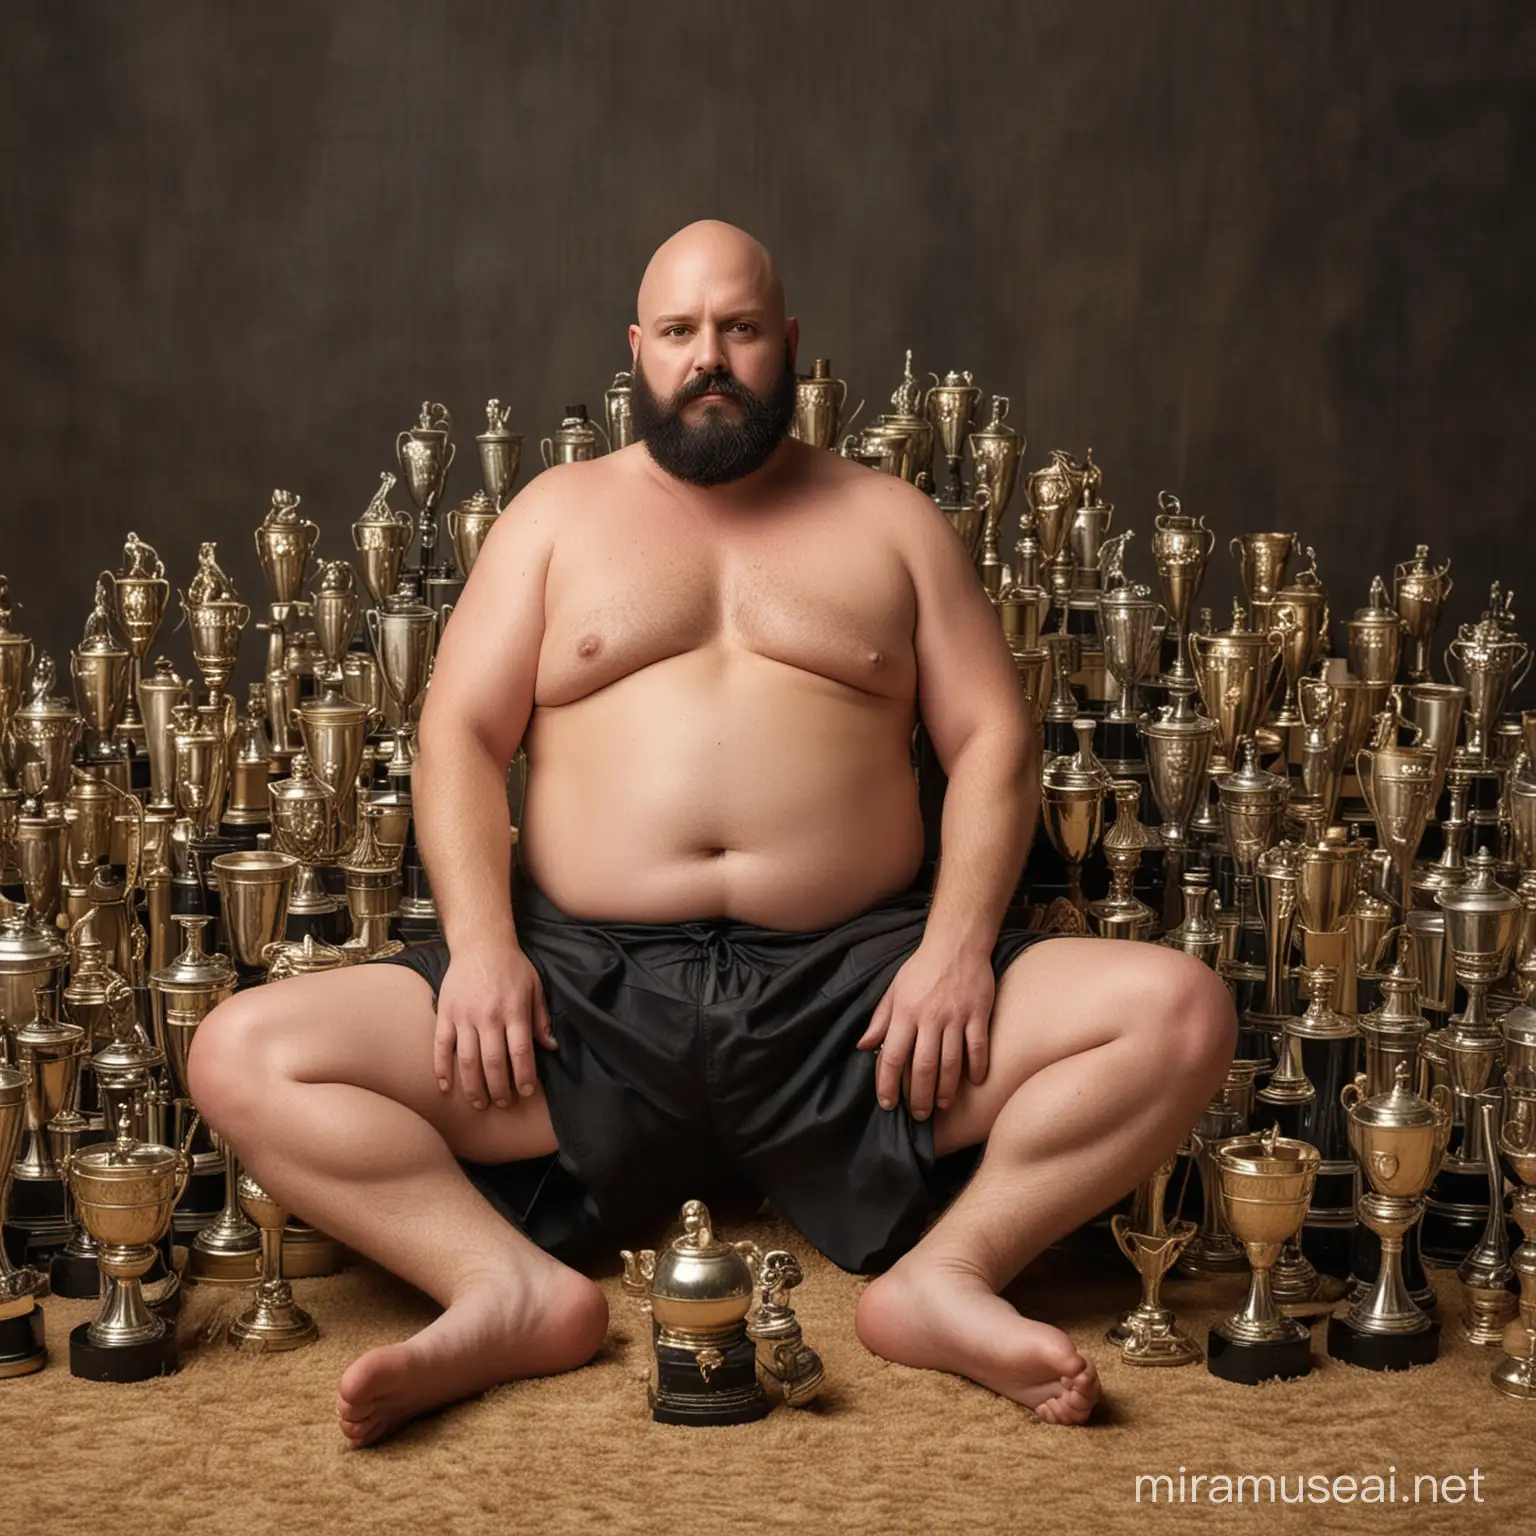 Bald Man Surrounded by Trophies Portrayal of Success and Achievement